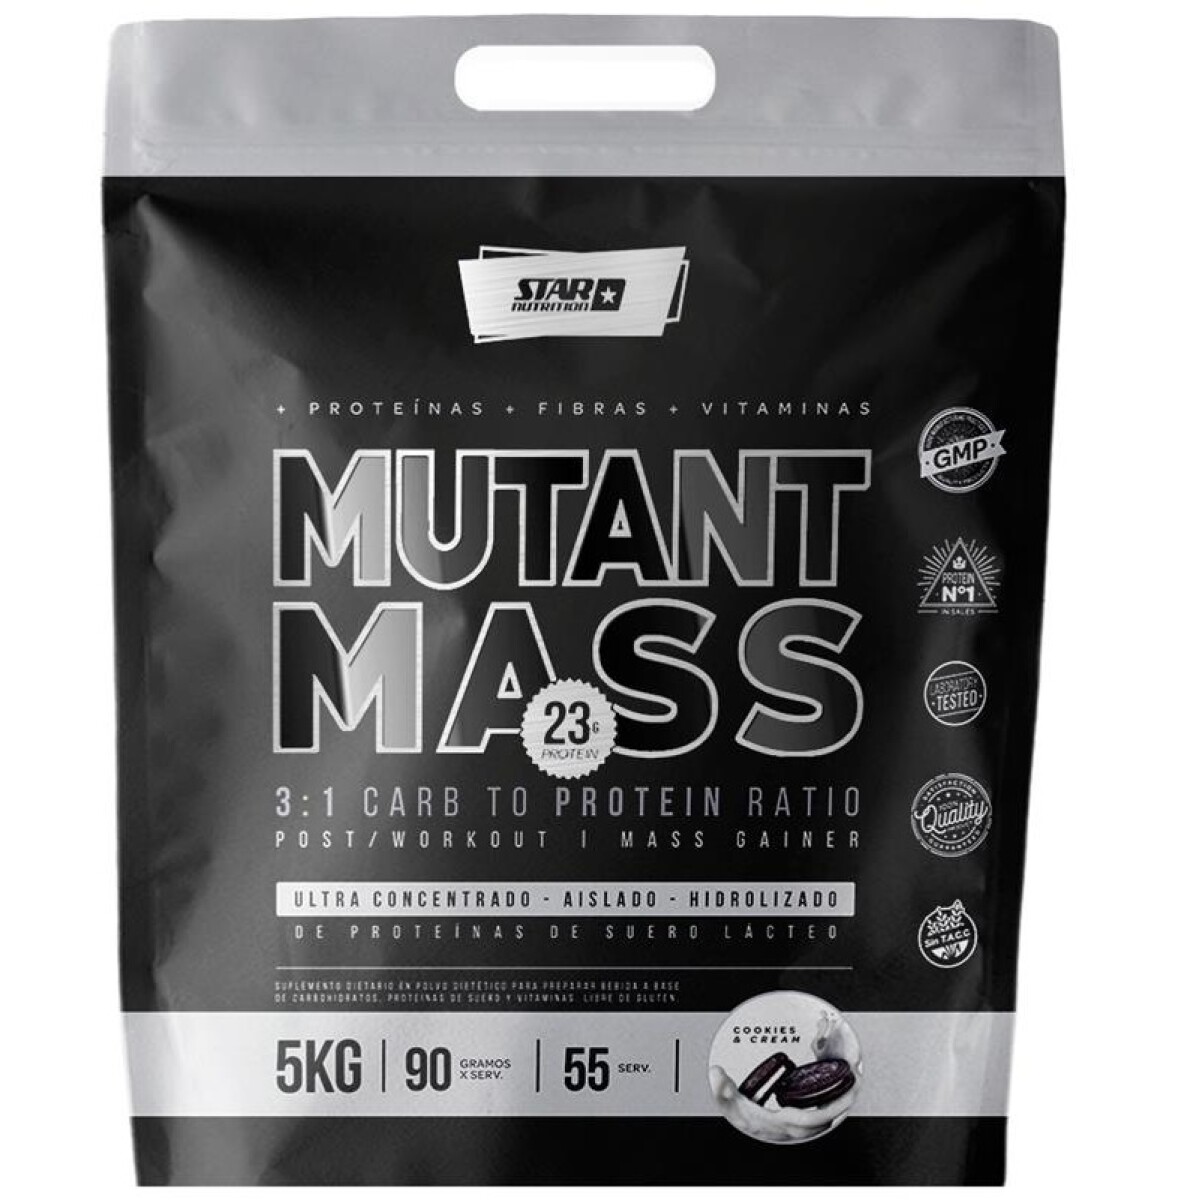 Mutant Mass Star Nutrition Cookies And Cream 5 Kgs. 